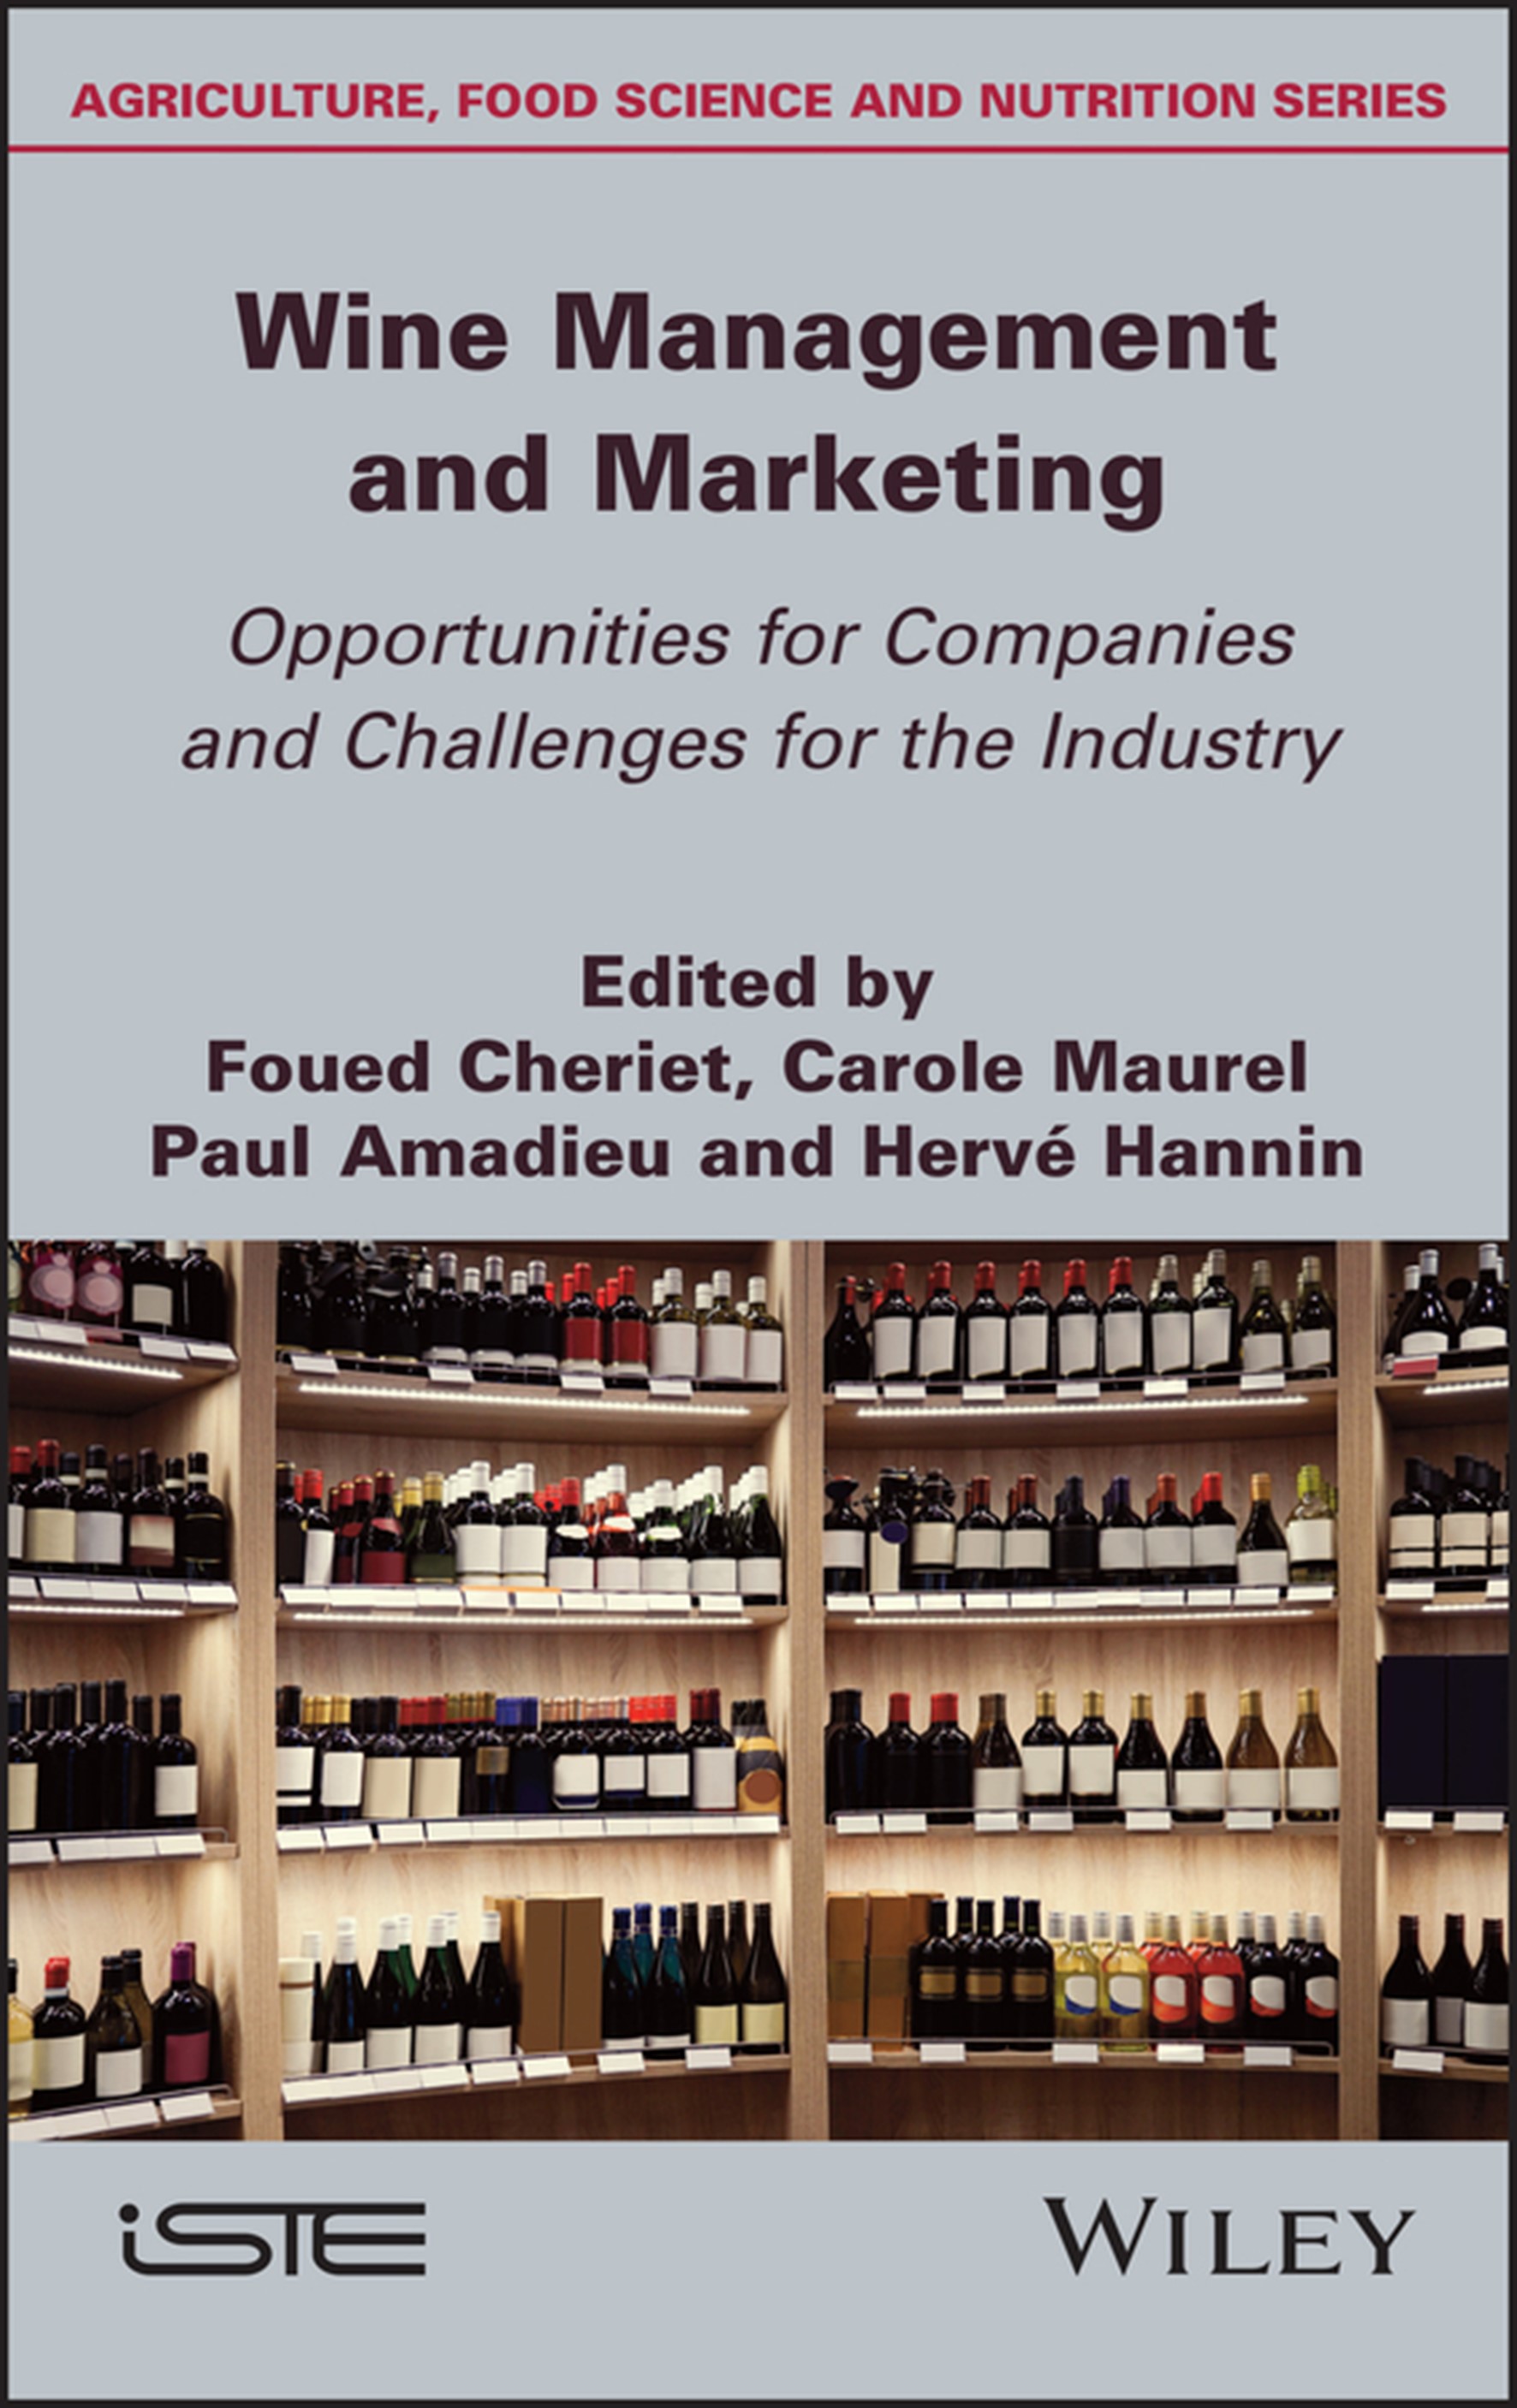 Wine Management and Marketing. Opportunities for Companies and Challenges for the Industry